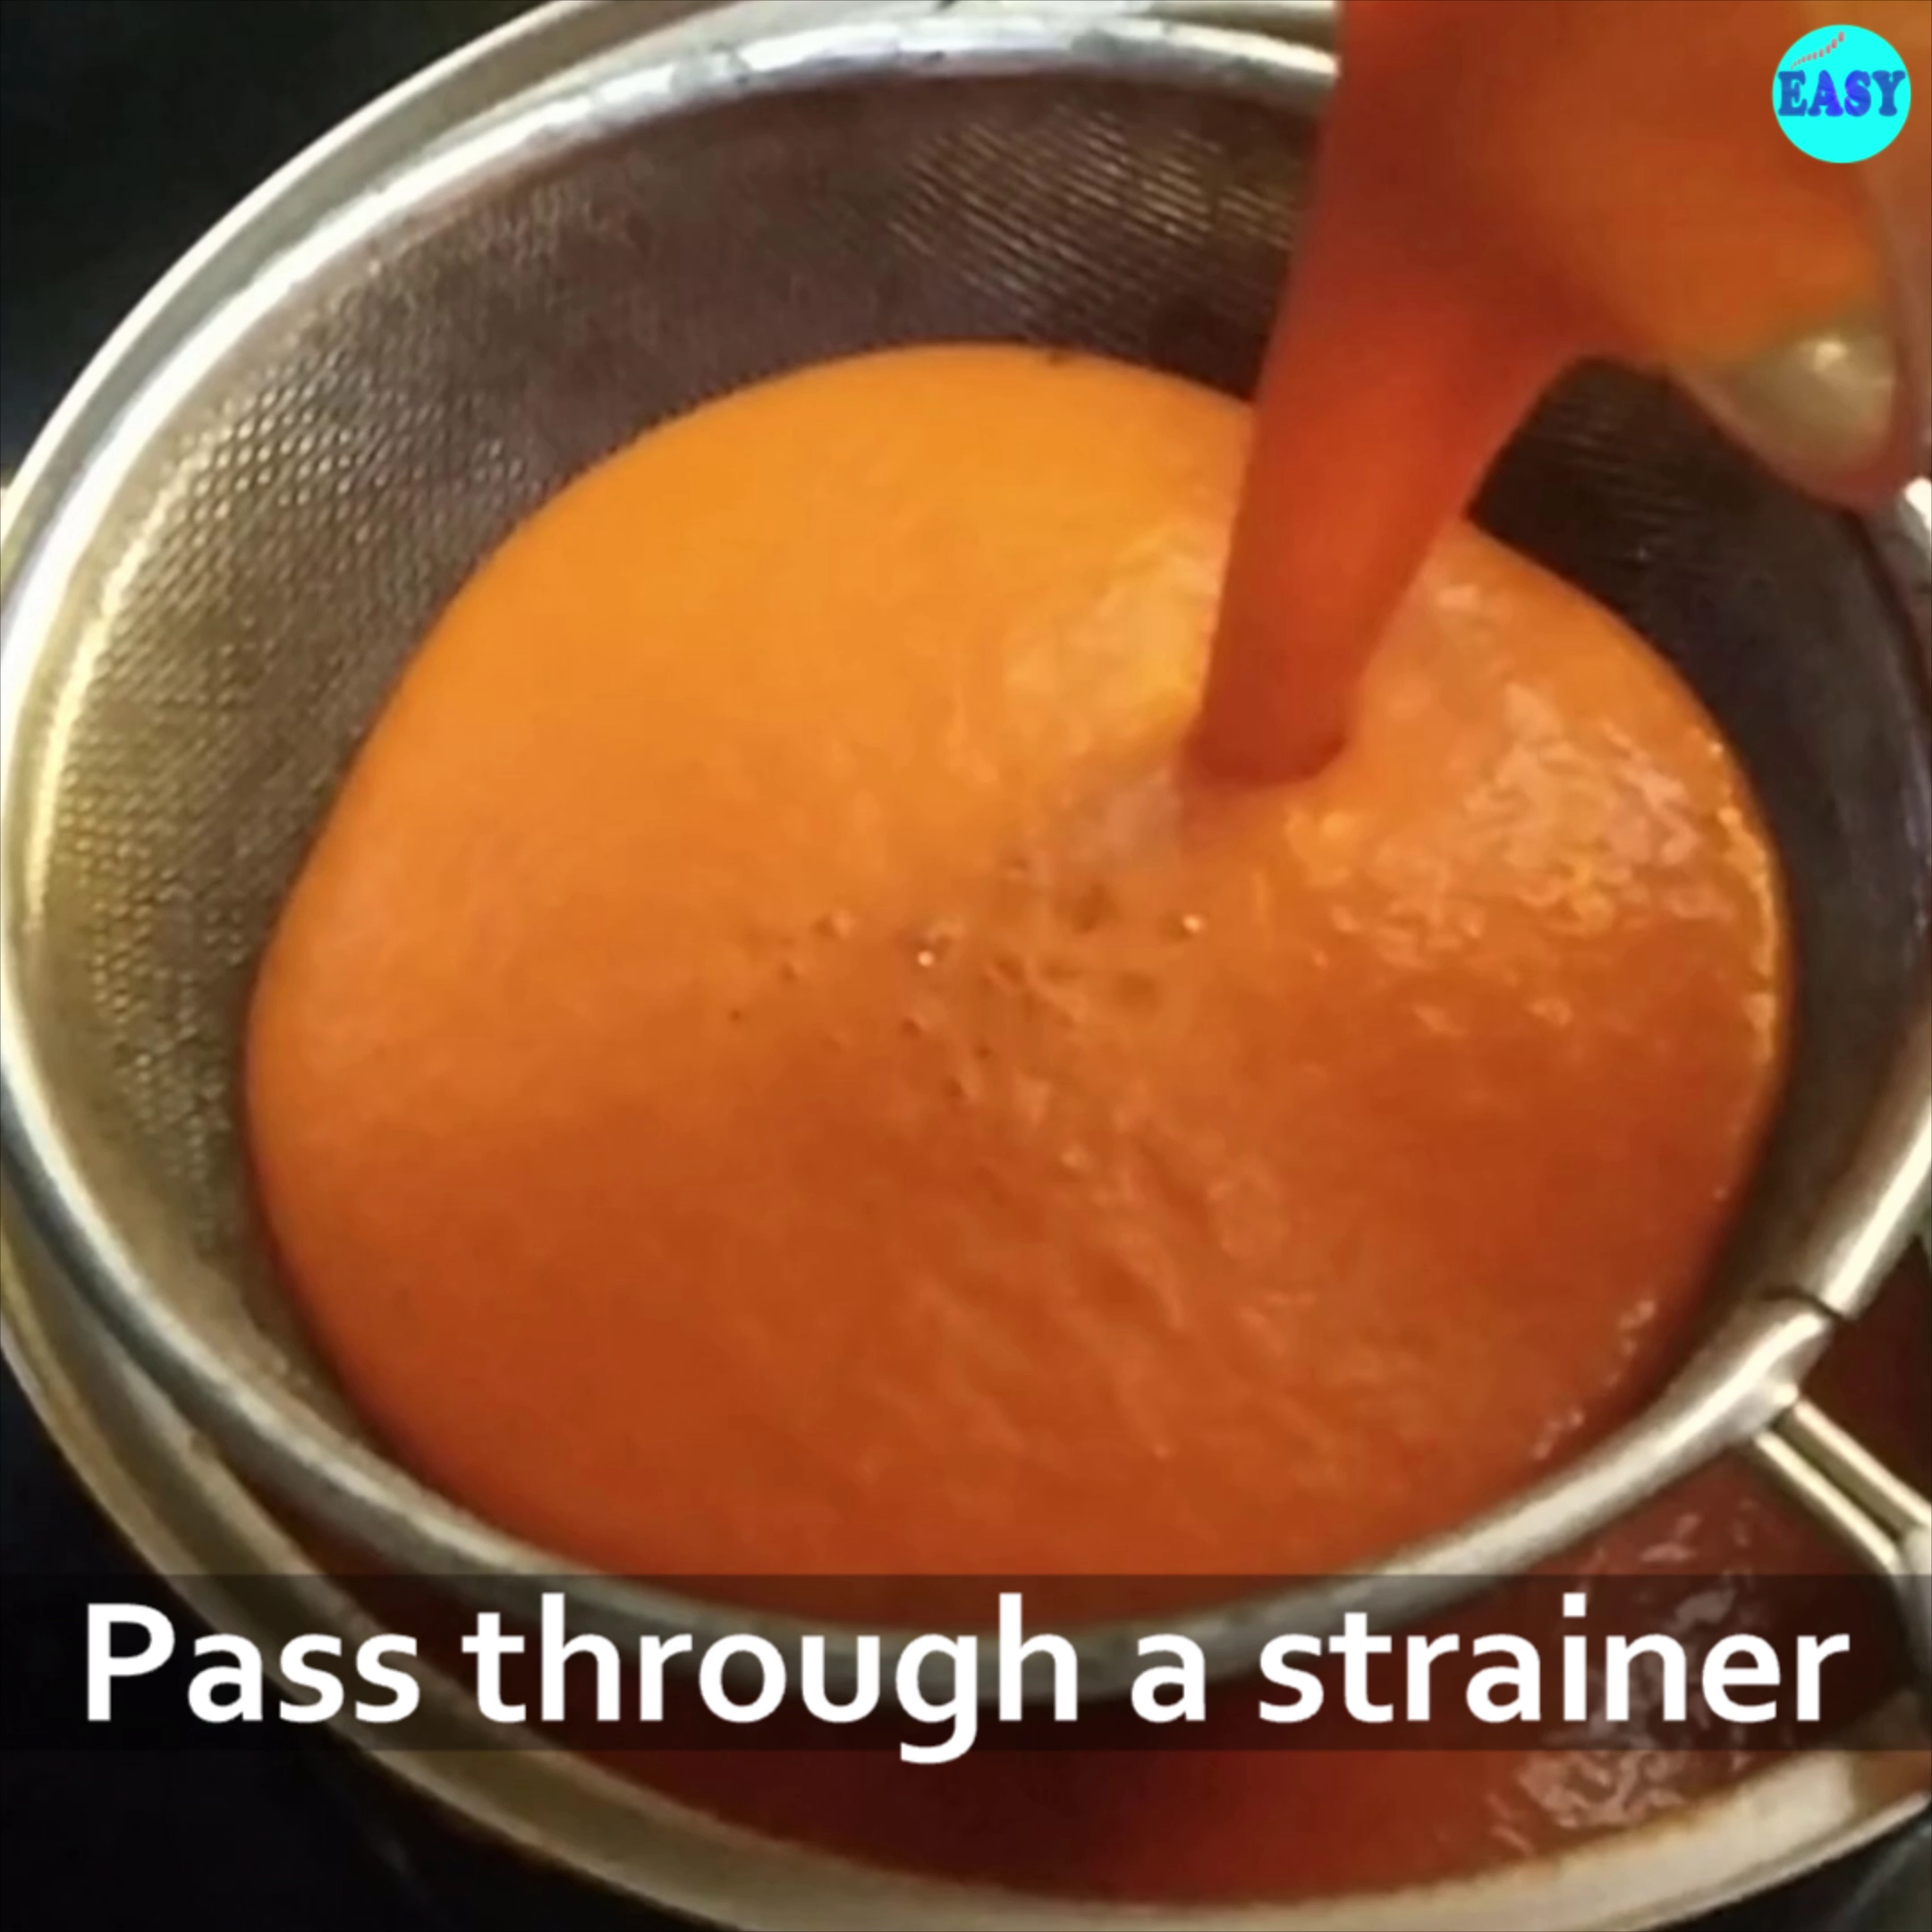 Step 6 - Pass the pureed tomato paste through a strainer. Though this step is optional but recommended to get a smooth texture of soup.